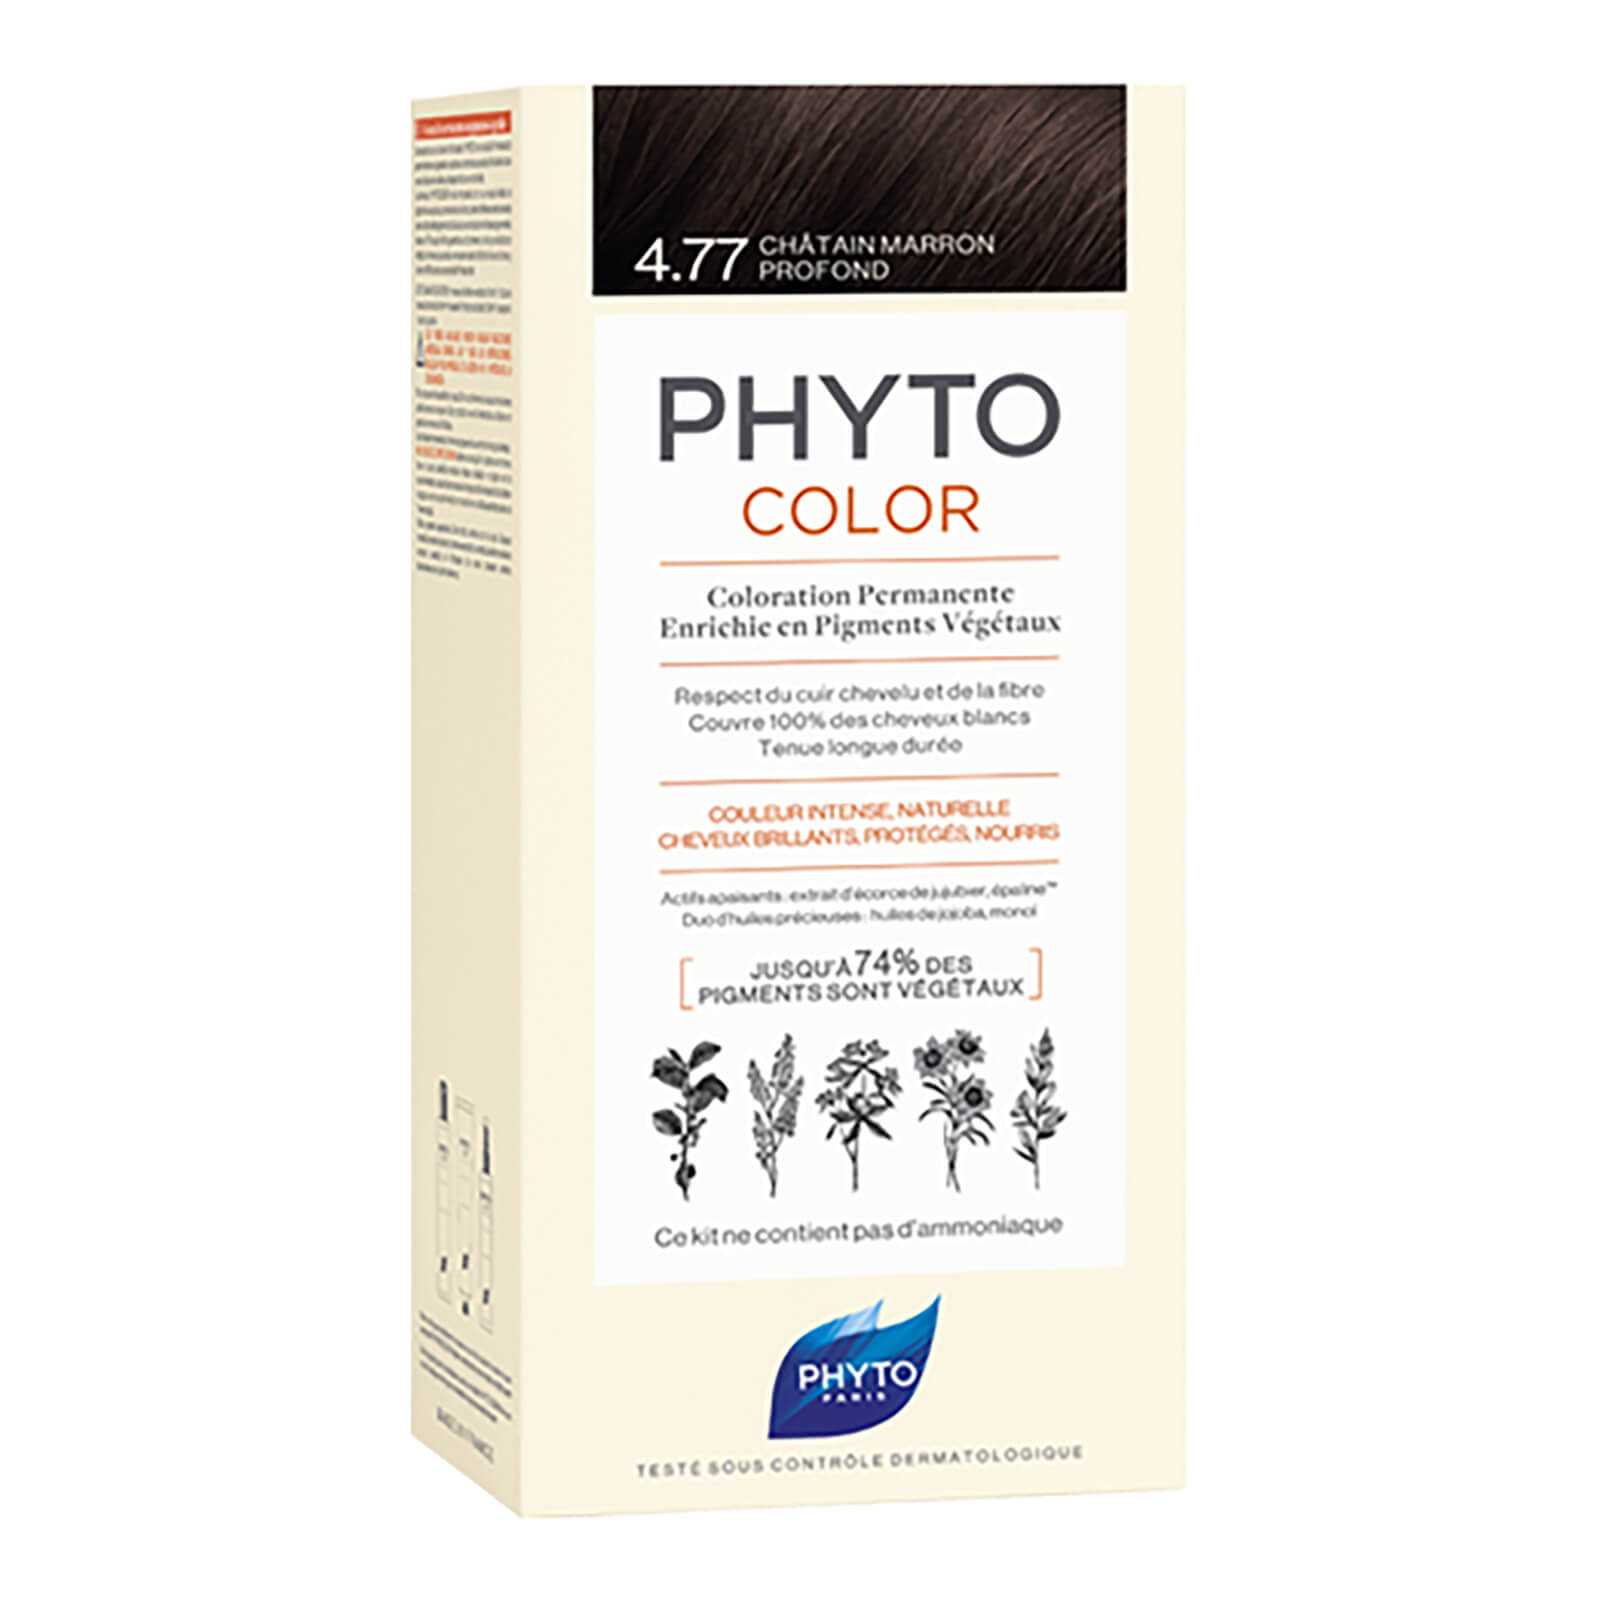 Phyto Hair Colour by Phytocolor - 4.77 Intense Chestnut 180g